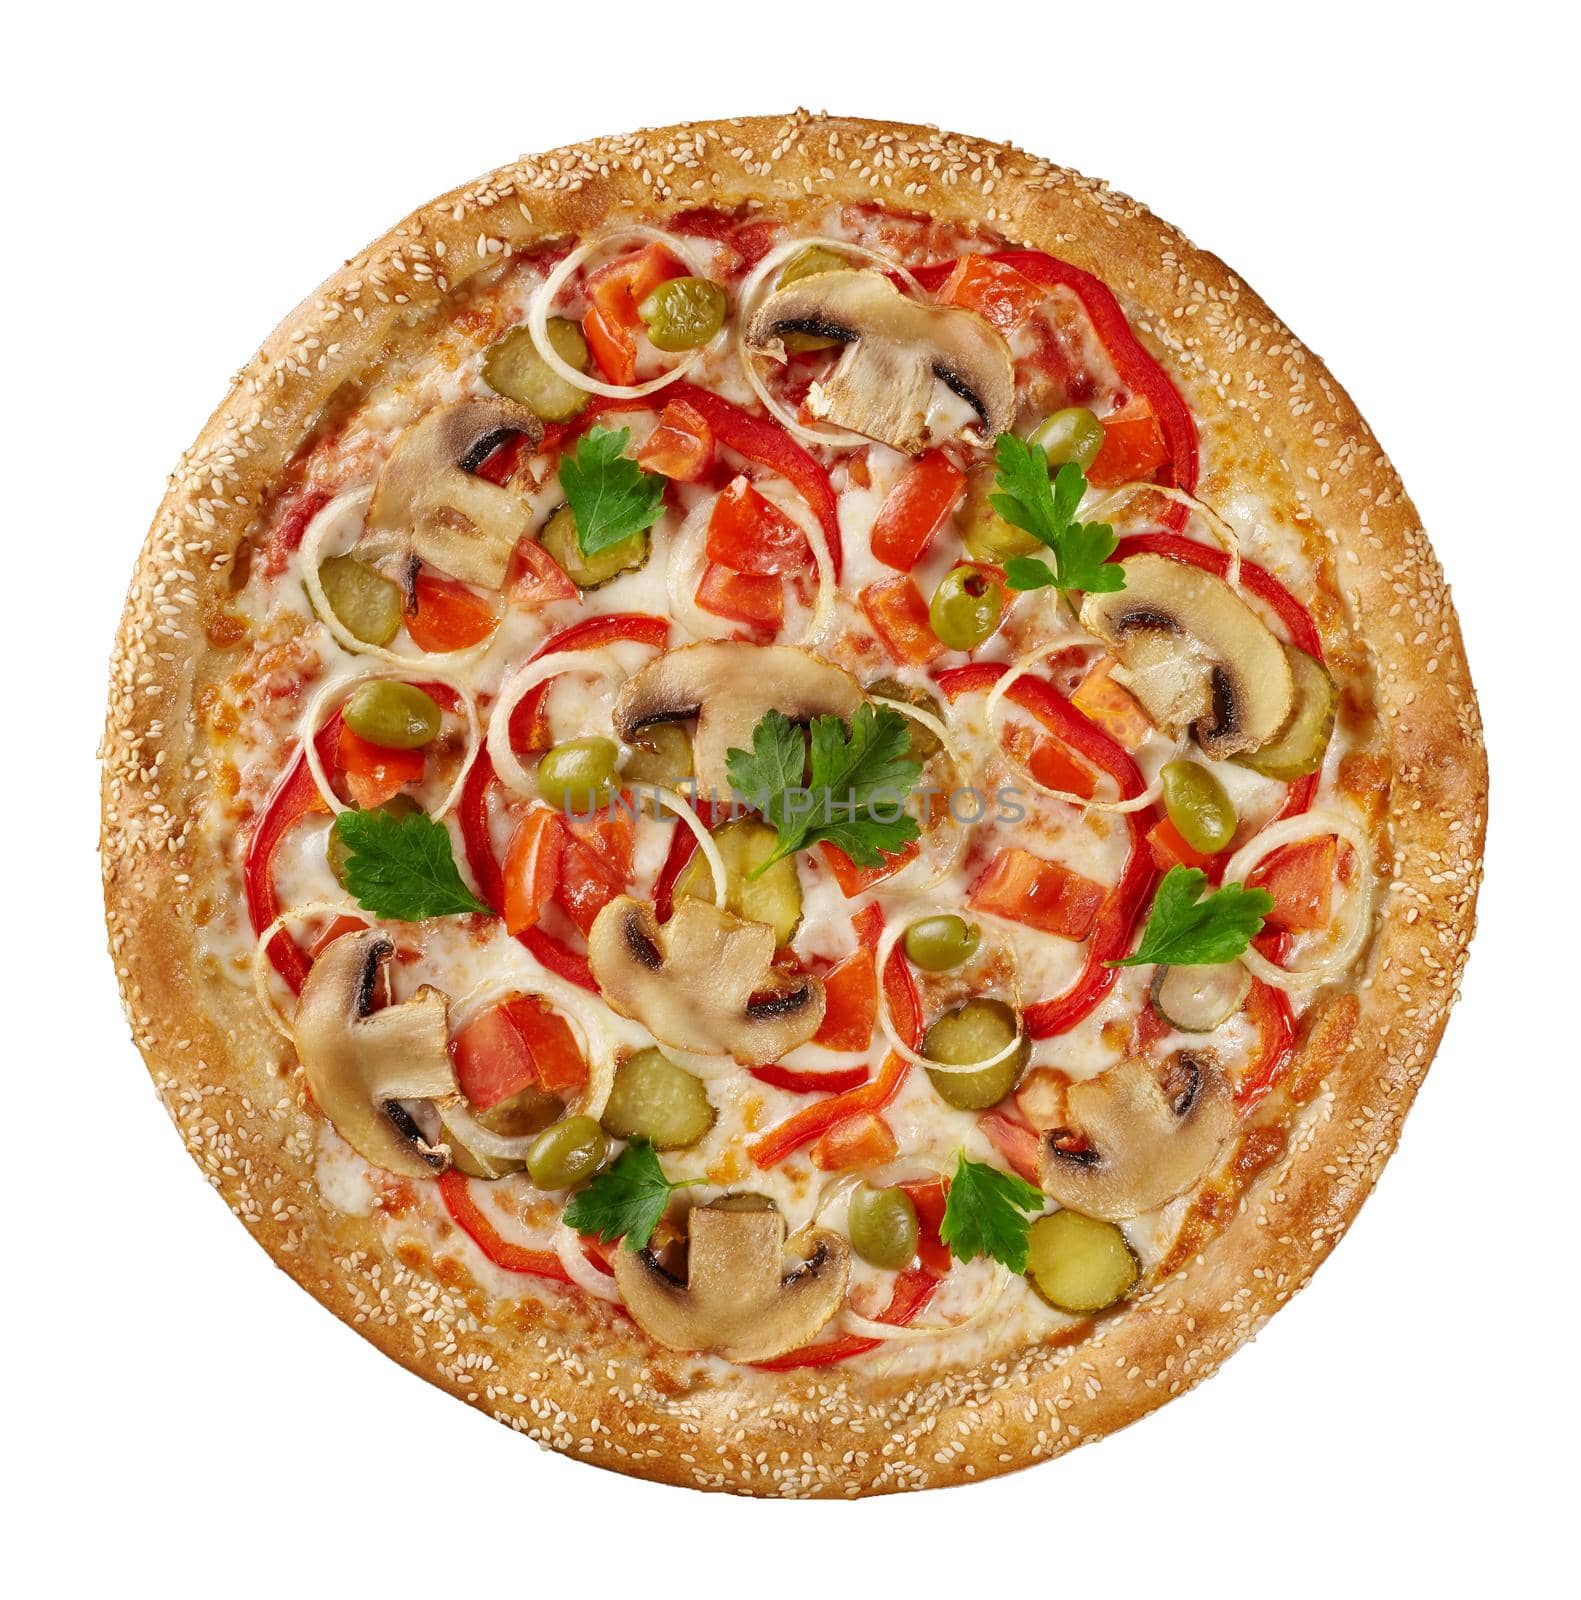 Top view of delicious vegetarian pizza with mushrooms, pickled cucumbers, tomatoes, bell peppers and onions garnished with olives and fresh greens on melted mozzarella layer sprinkled with sesame